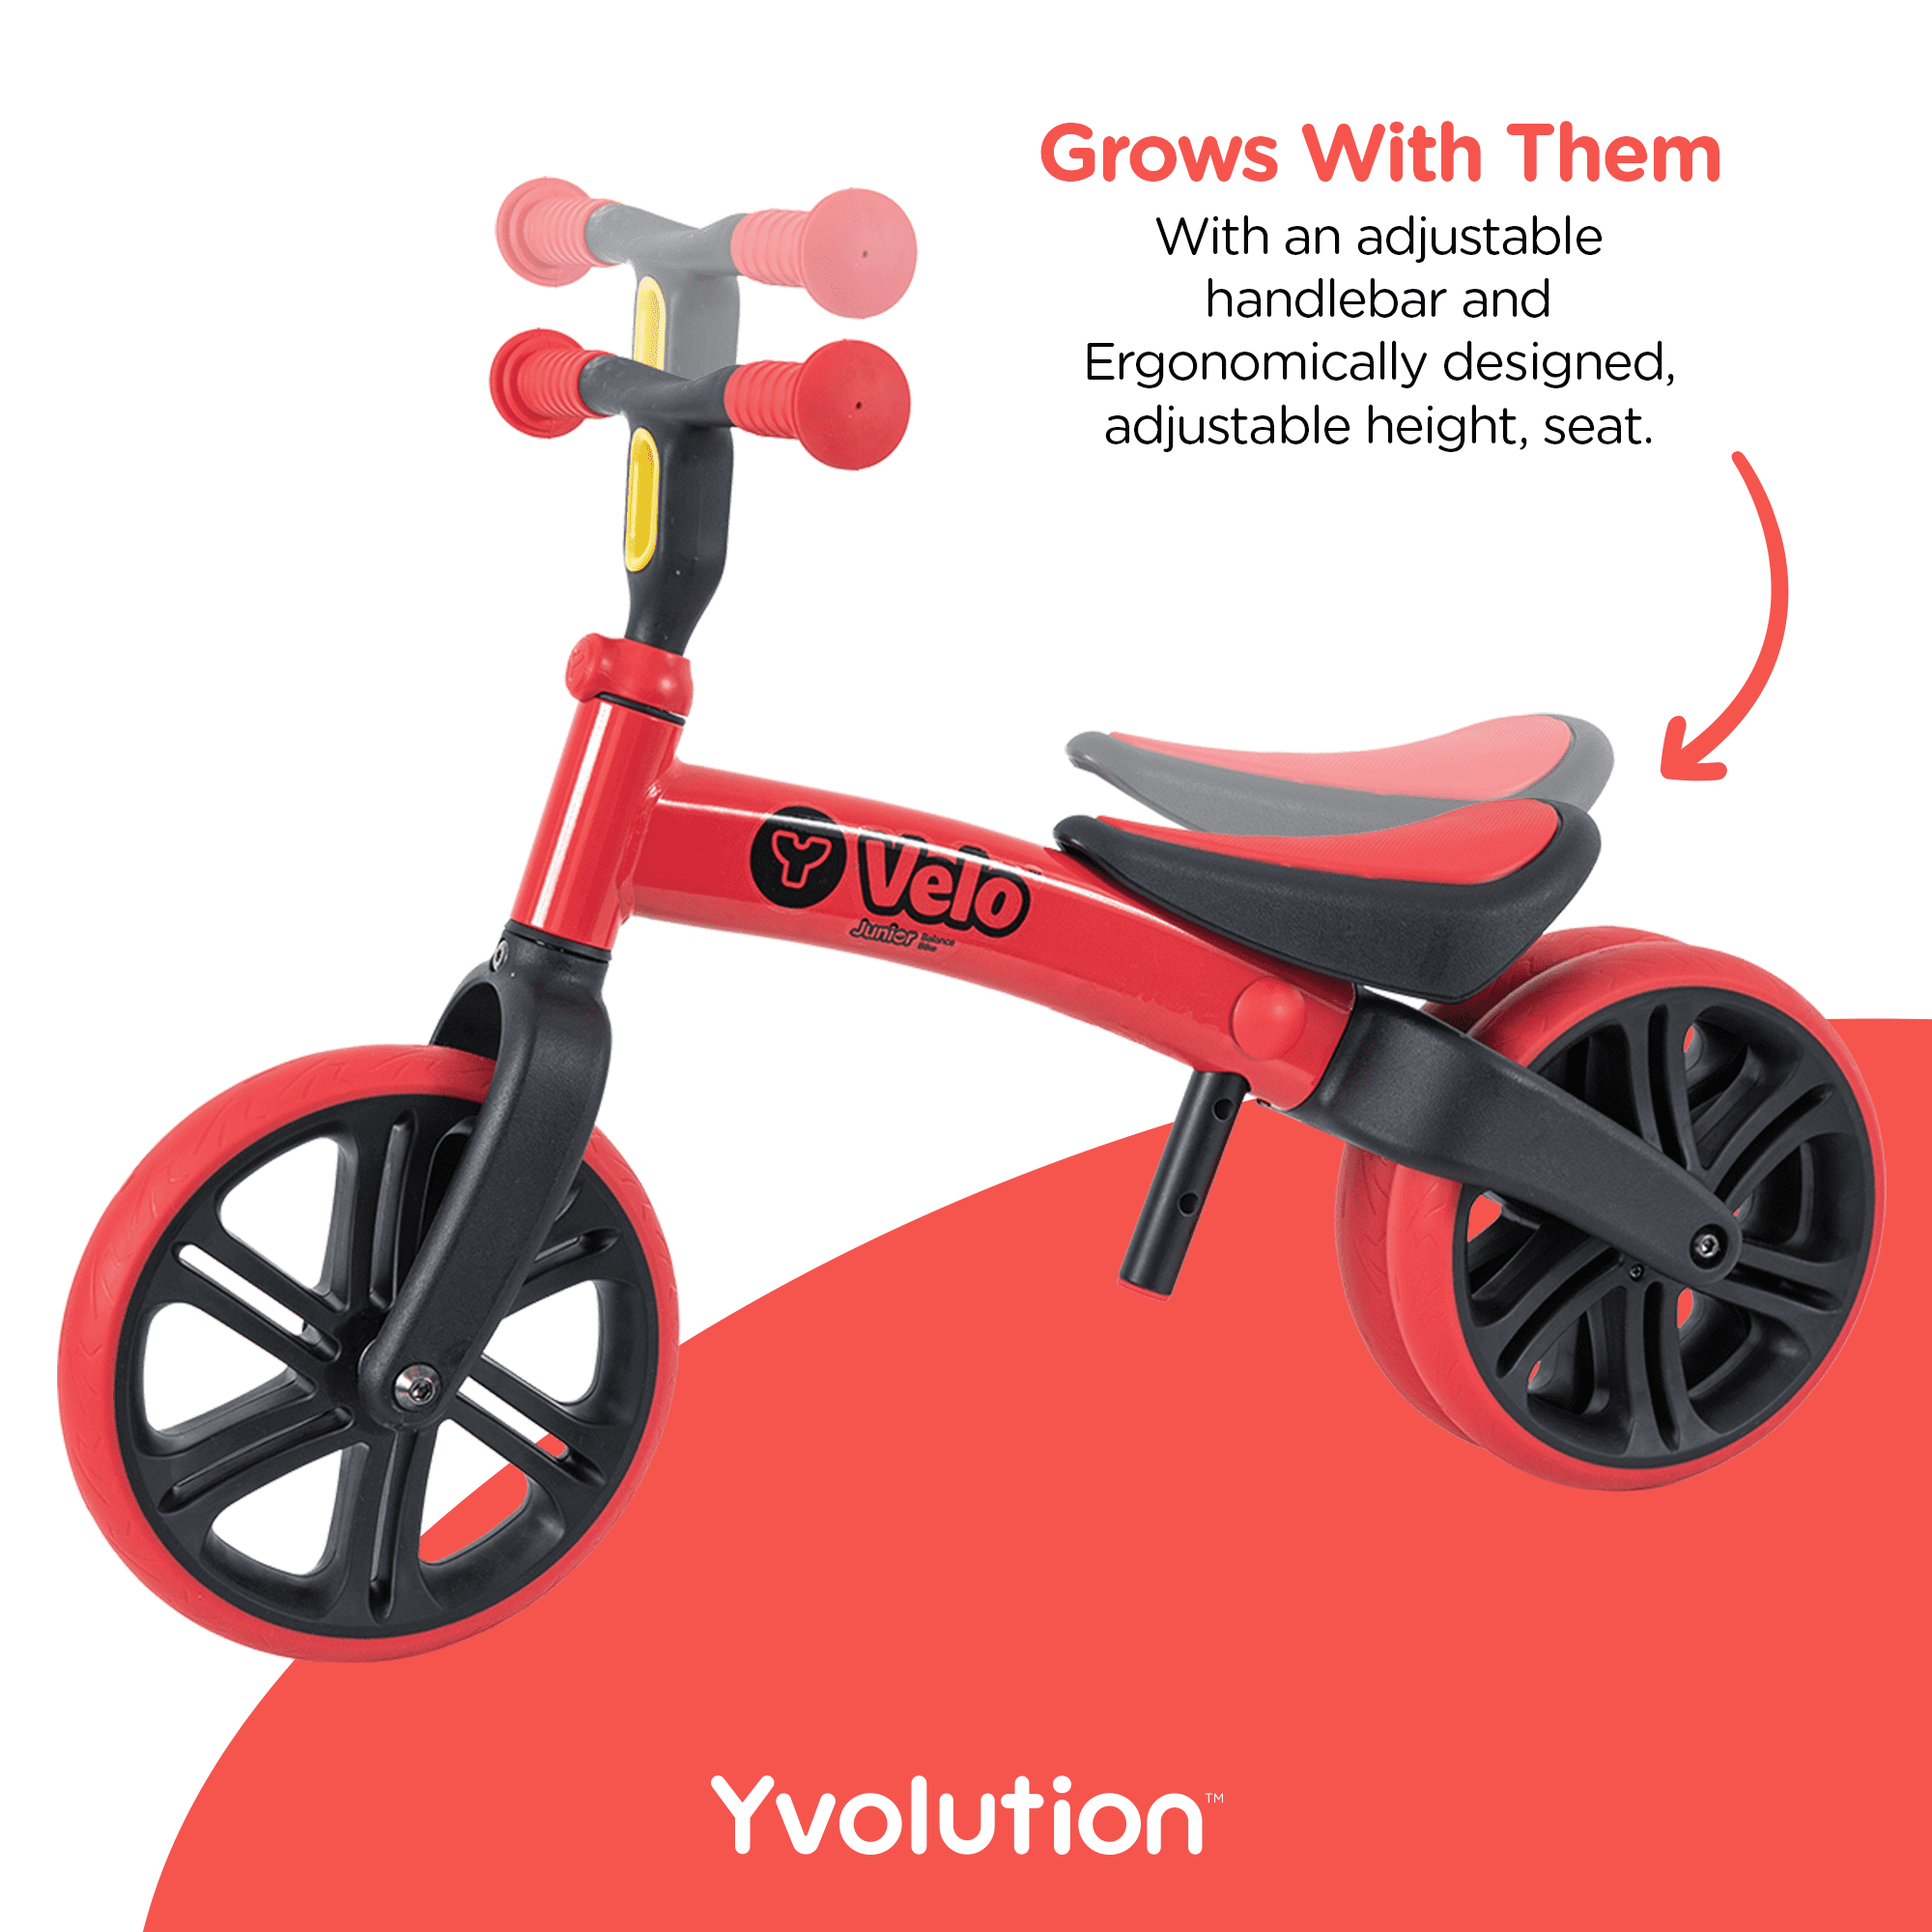 Yvolution Velo Toddler Balance 18 3 Boys Old Girls, (Red) and Years Months Bike Wheel to 9